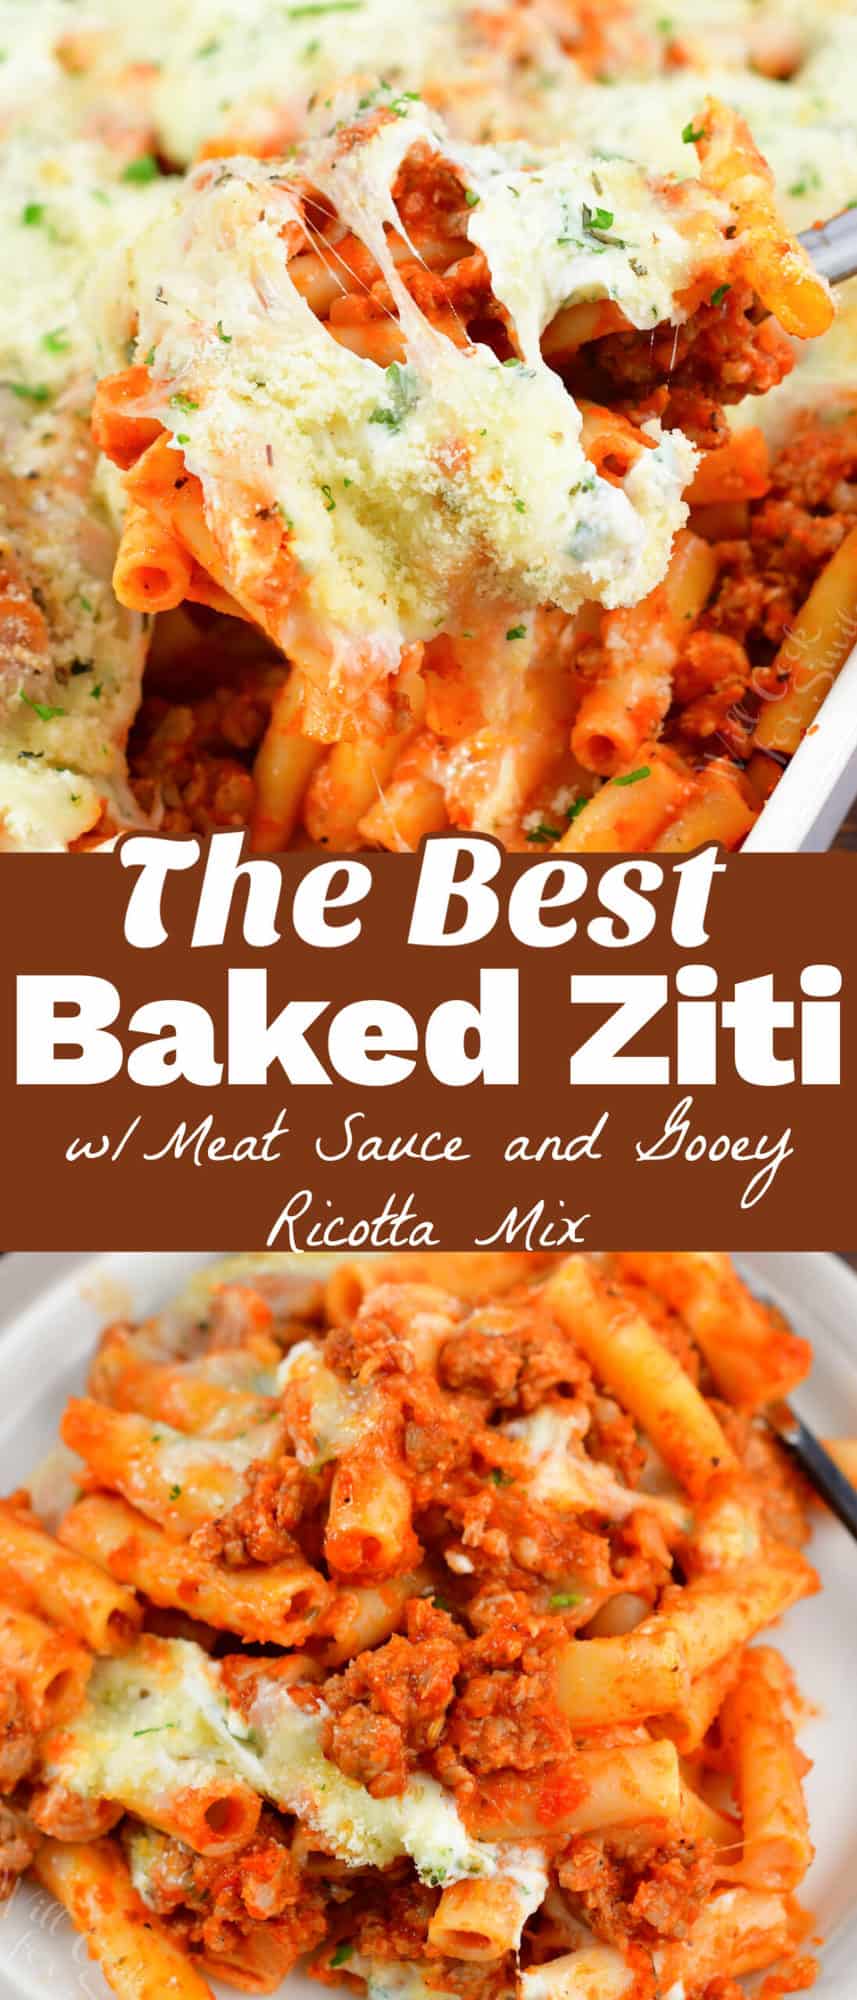 baked ziti collage of two images and a title